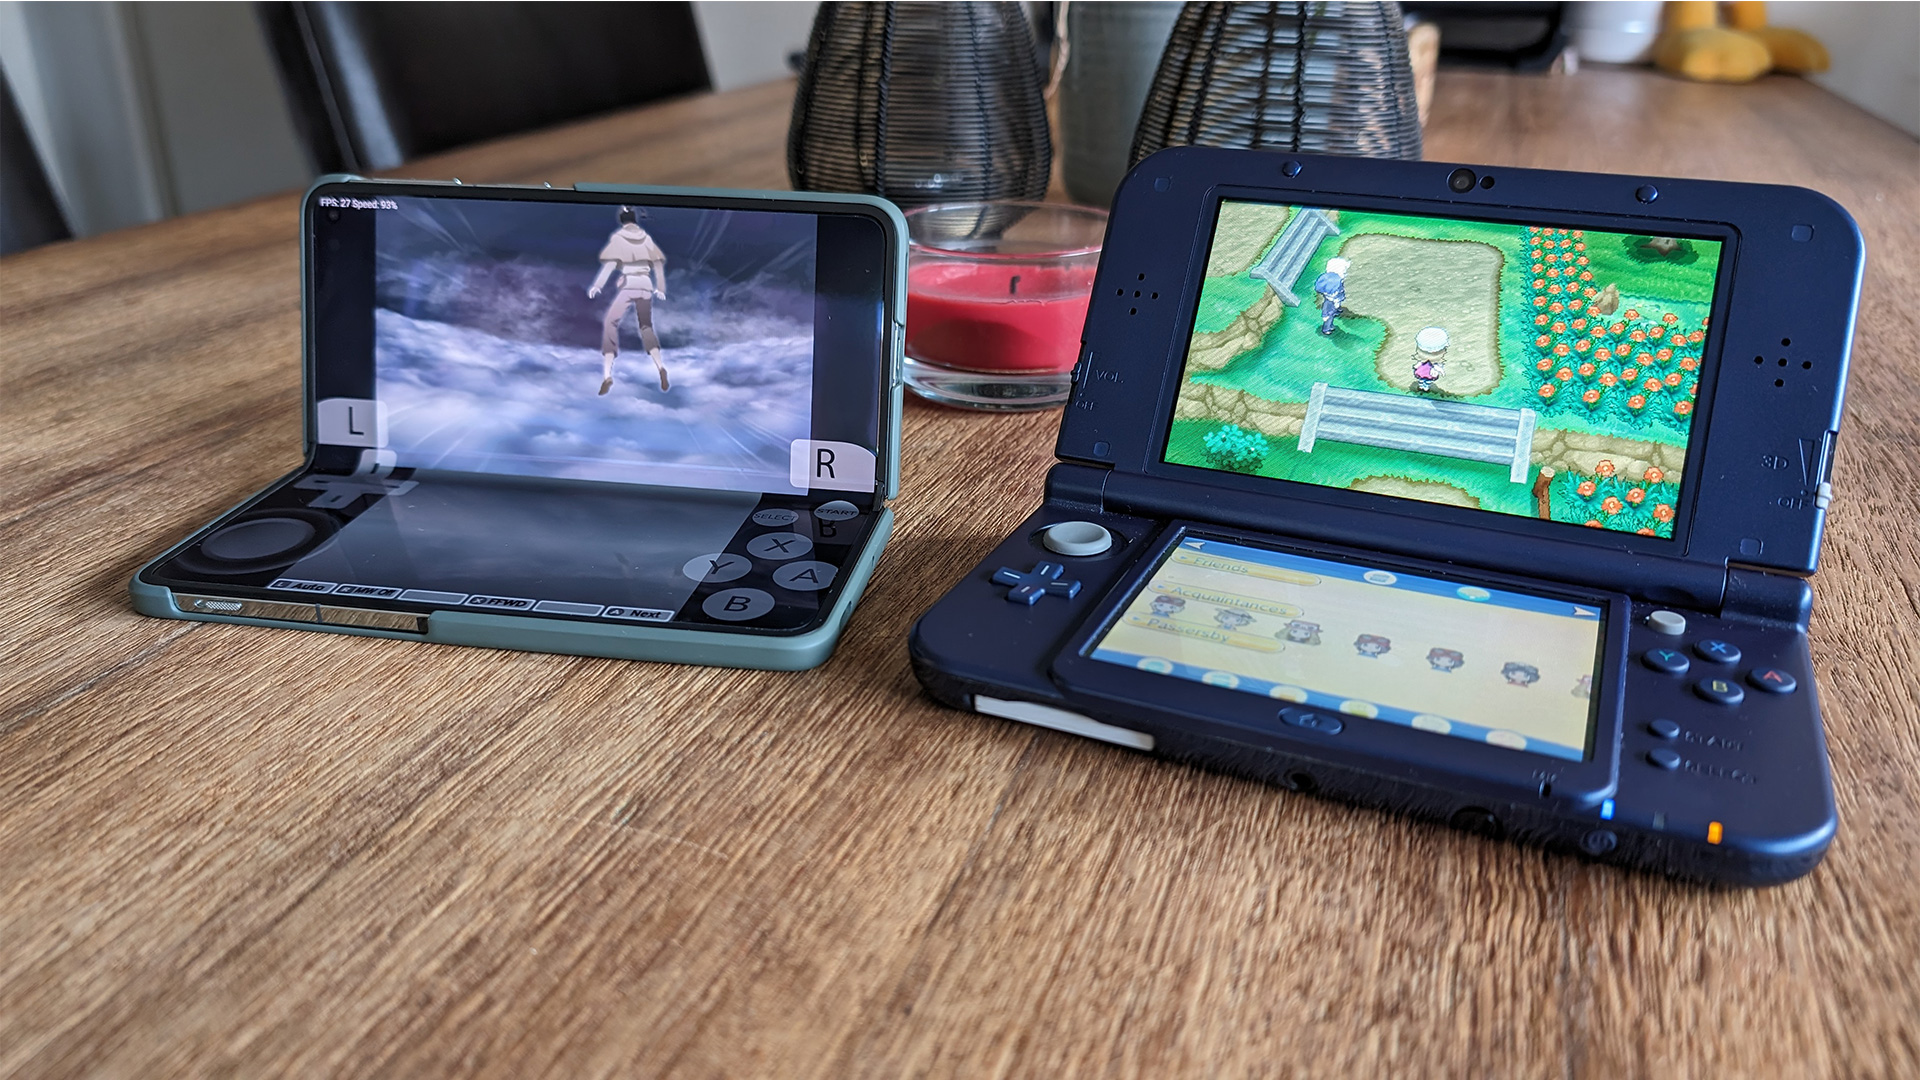 oneplus open review nintendo 3ds